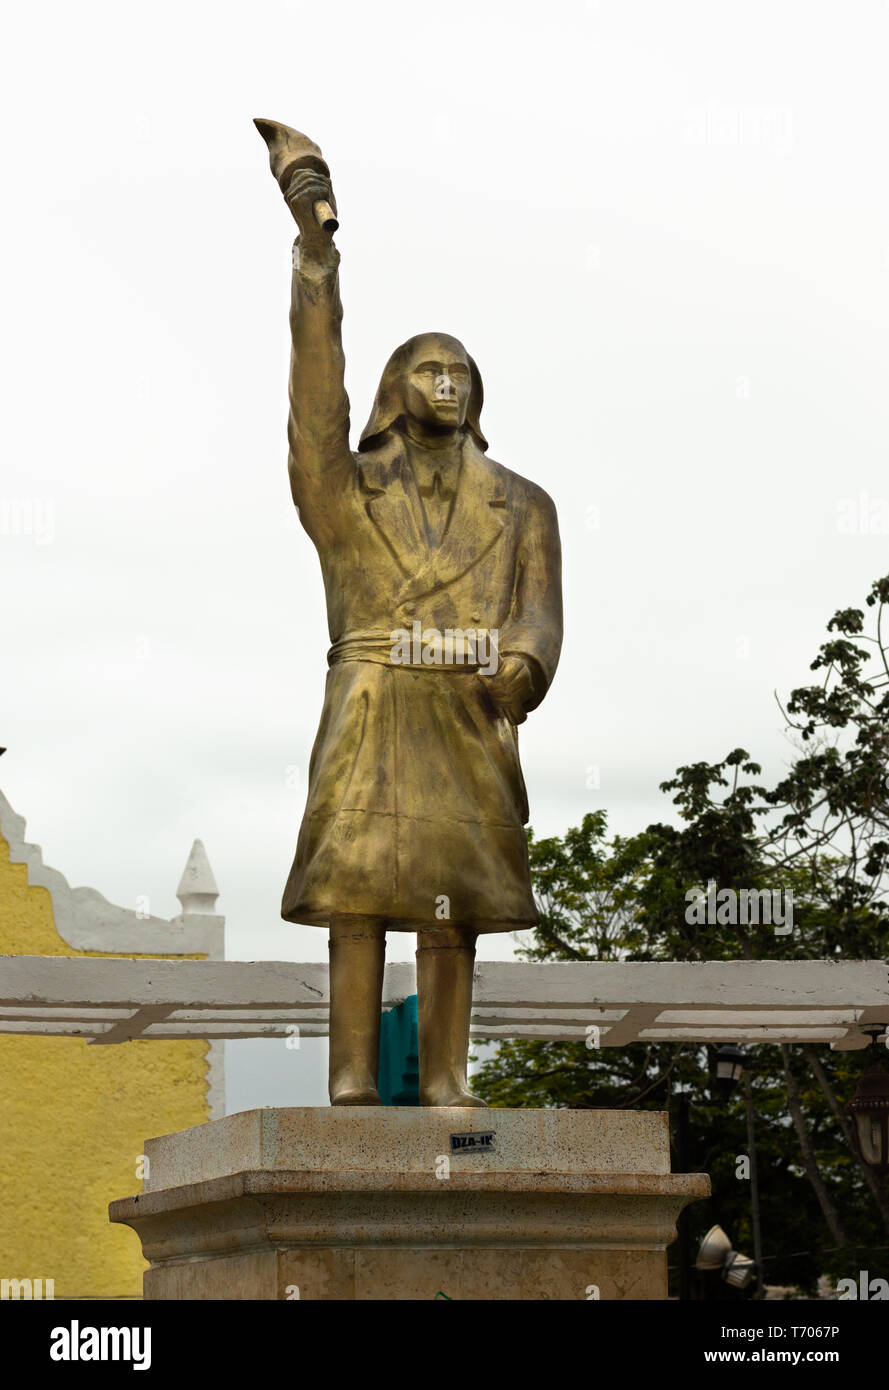 Miguel Hidalgo monument in Halacho, Yucatan. He was a Mexican Roman Catholic priest and a leader of the Mexican War of Independence. Stock Photo